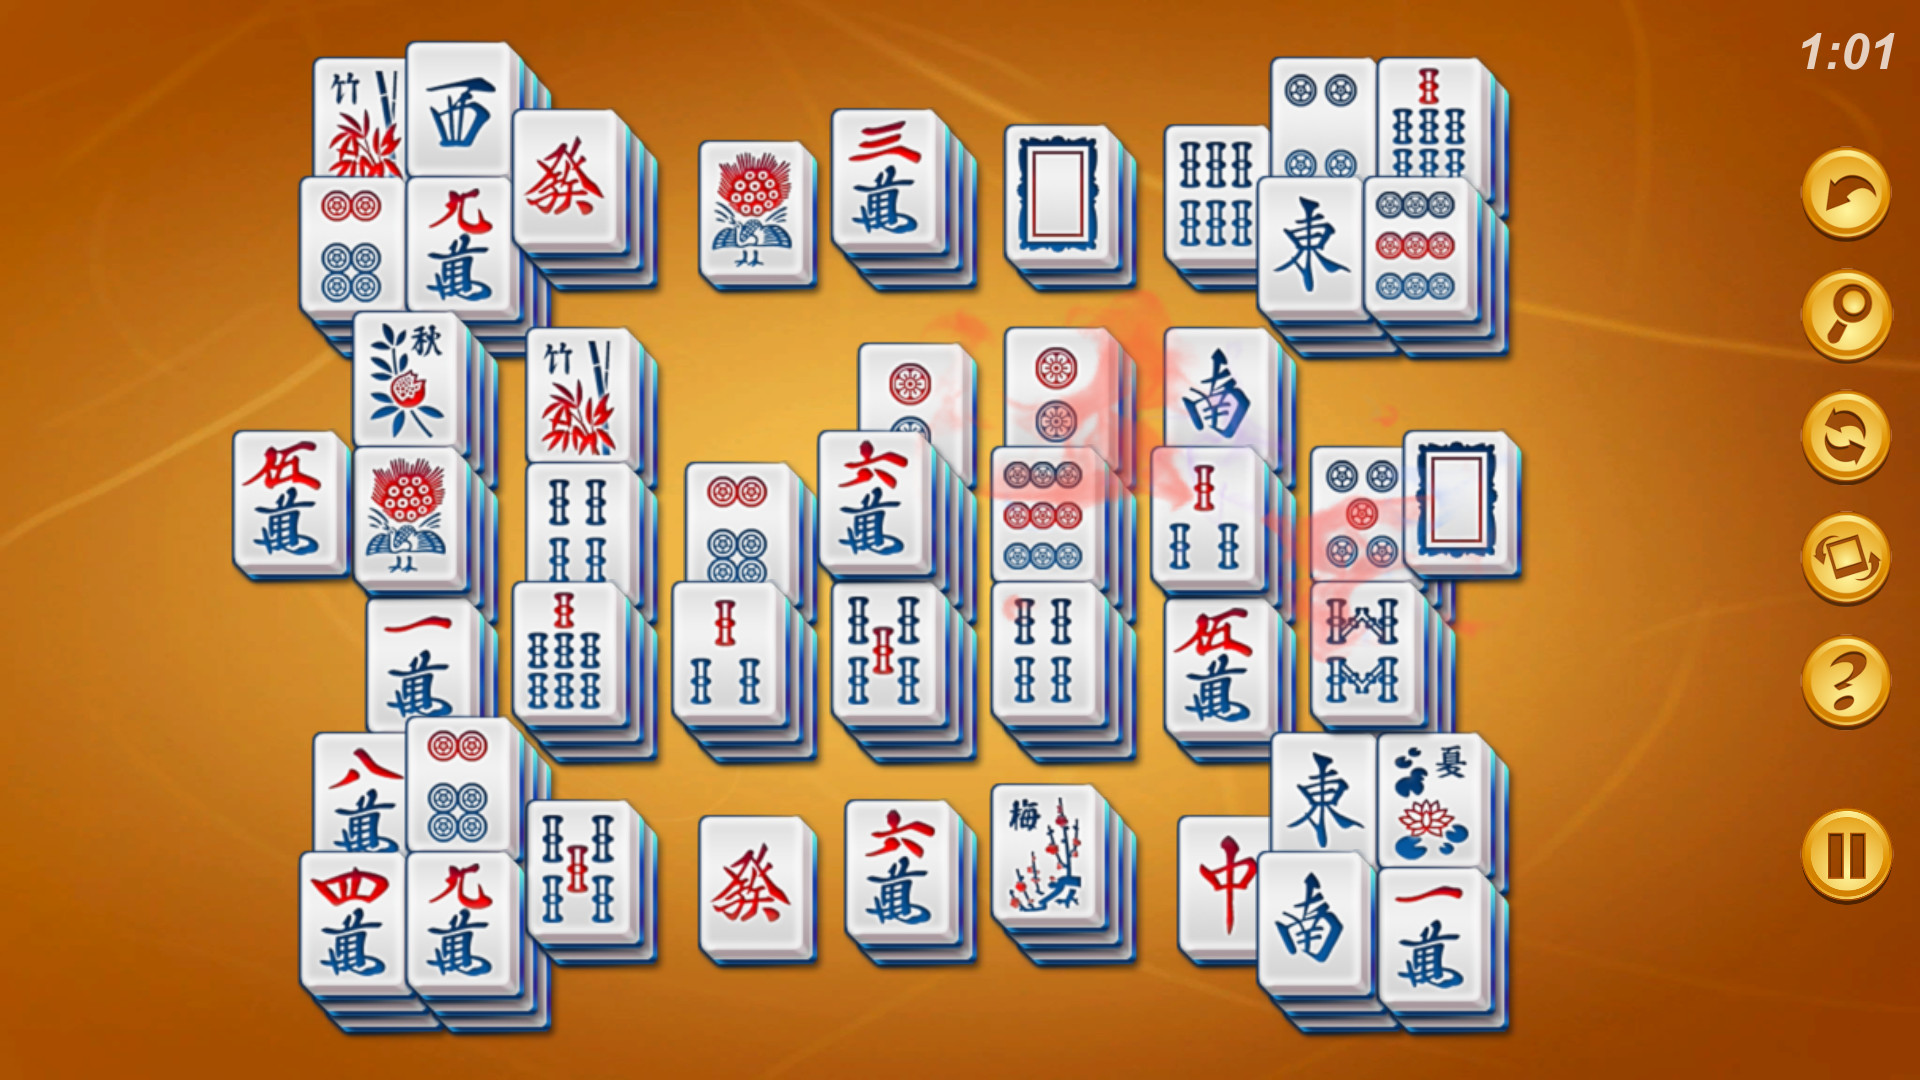 download the last version for iphoneMahjong Deluxe Free